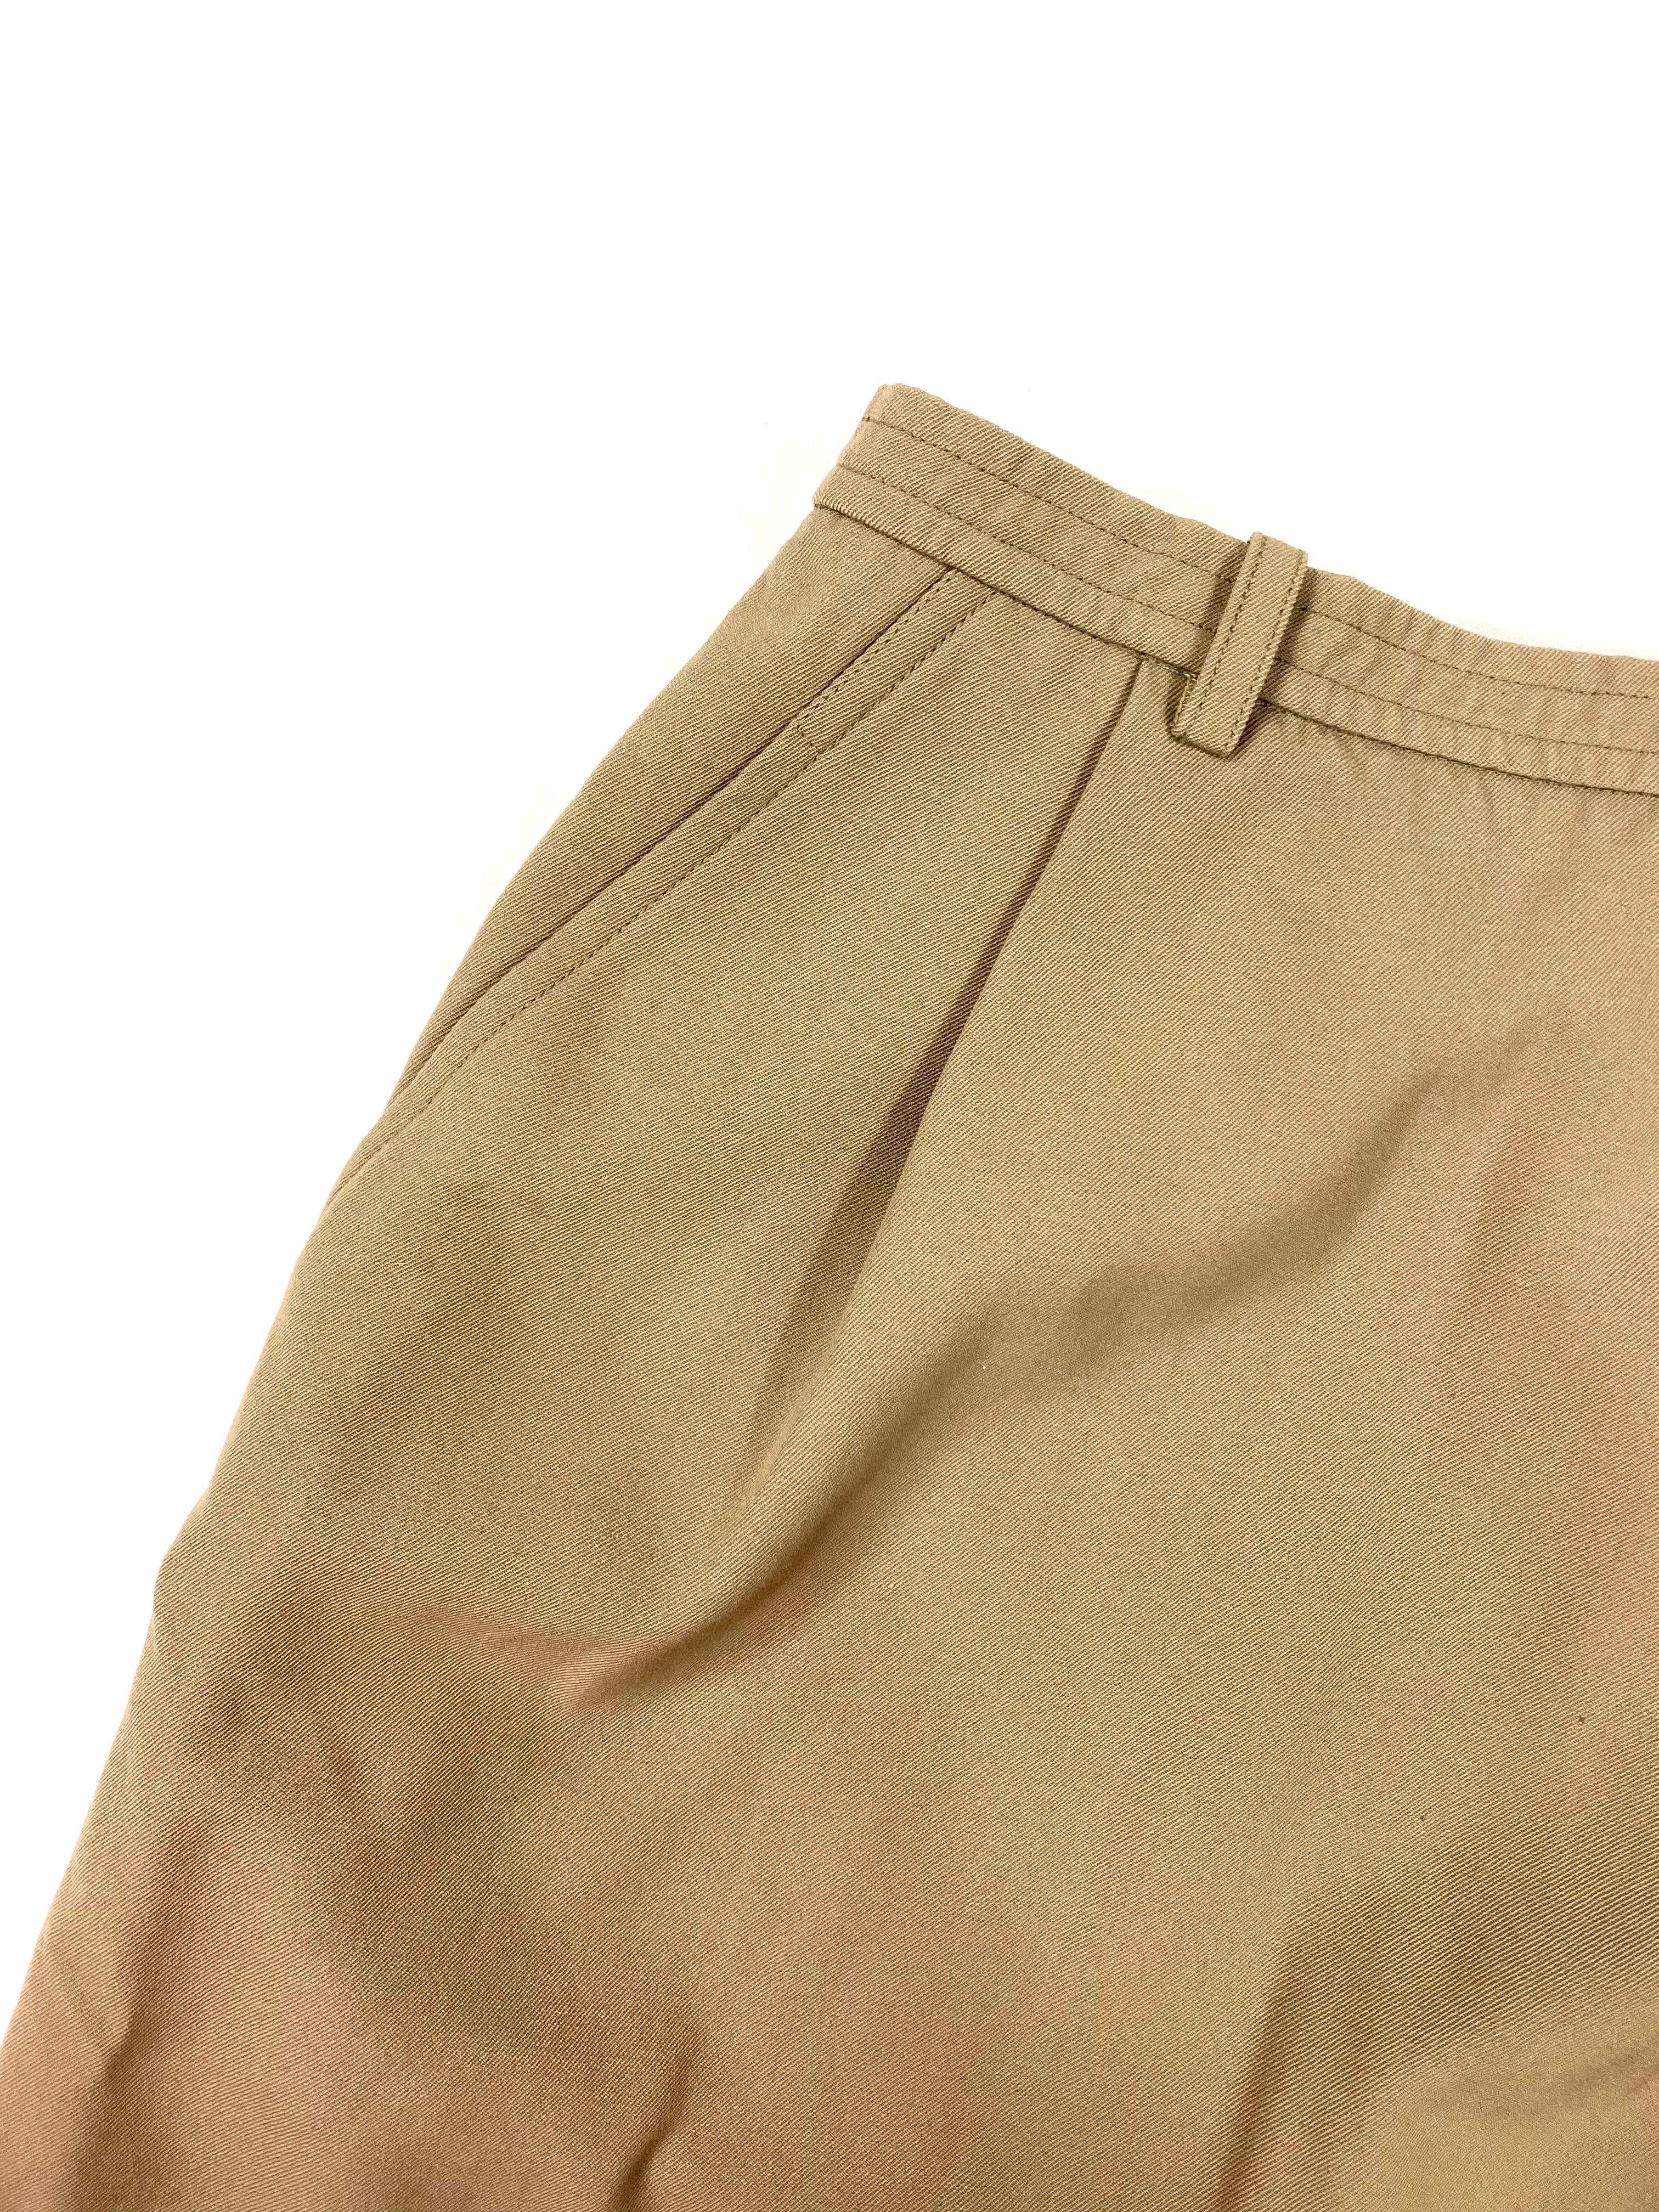 Yves Saint Laurent Rive Gauche Paris Brown Skirt, Size 36 In Excellent Condition For Sale In Beverly Hills, CA